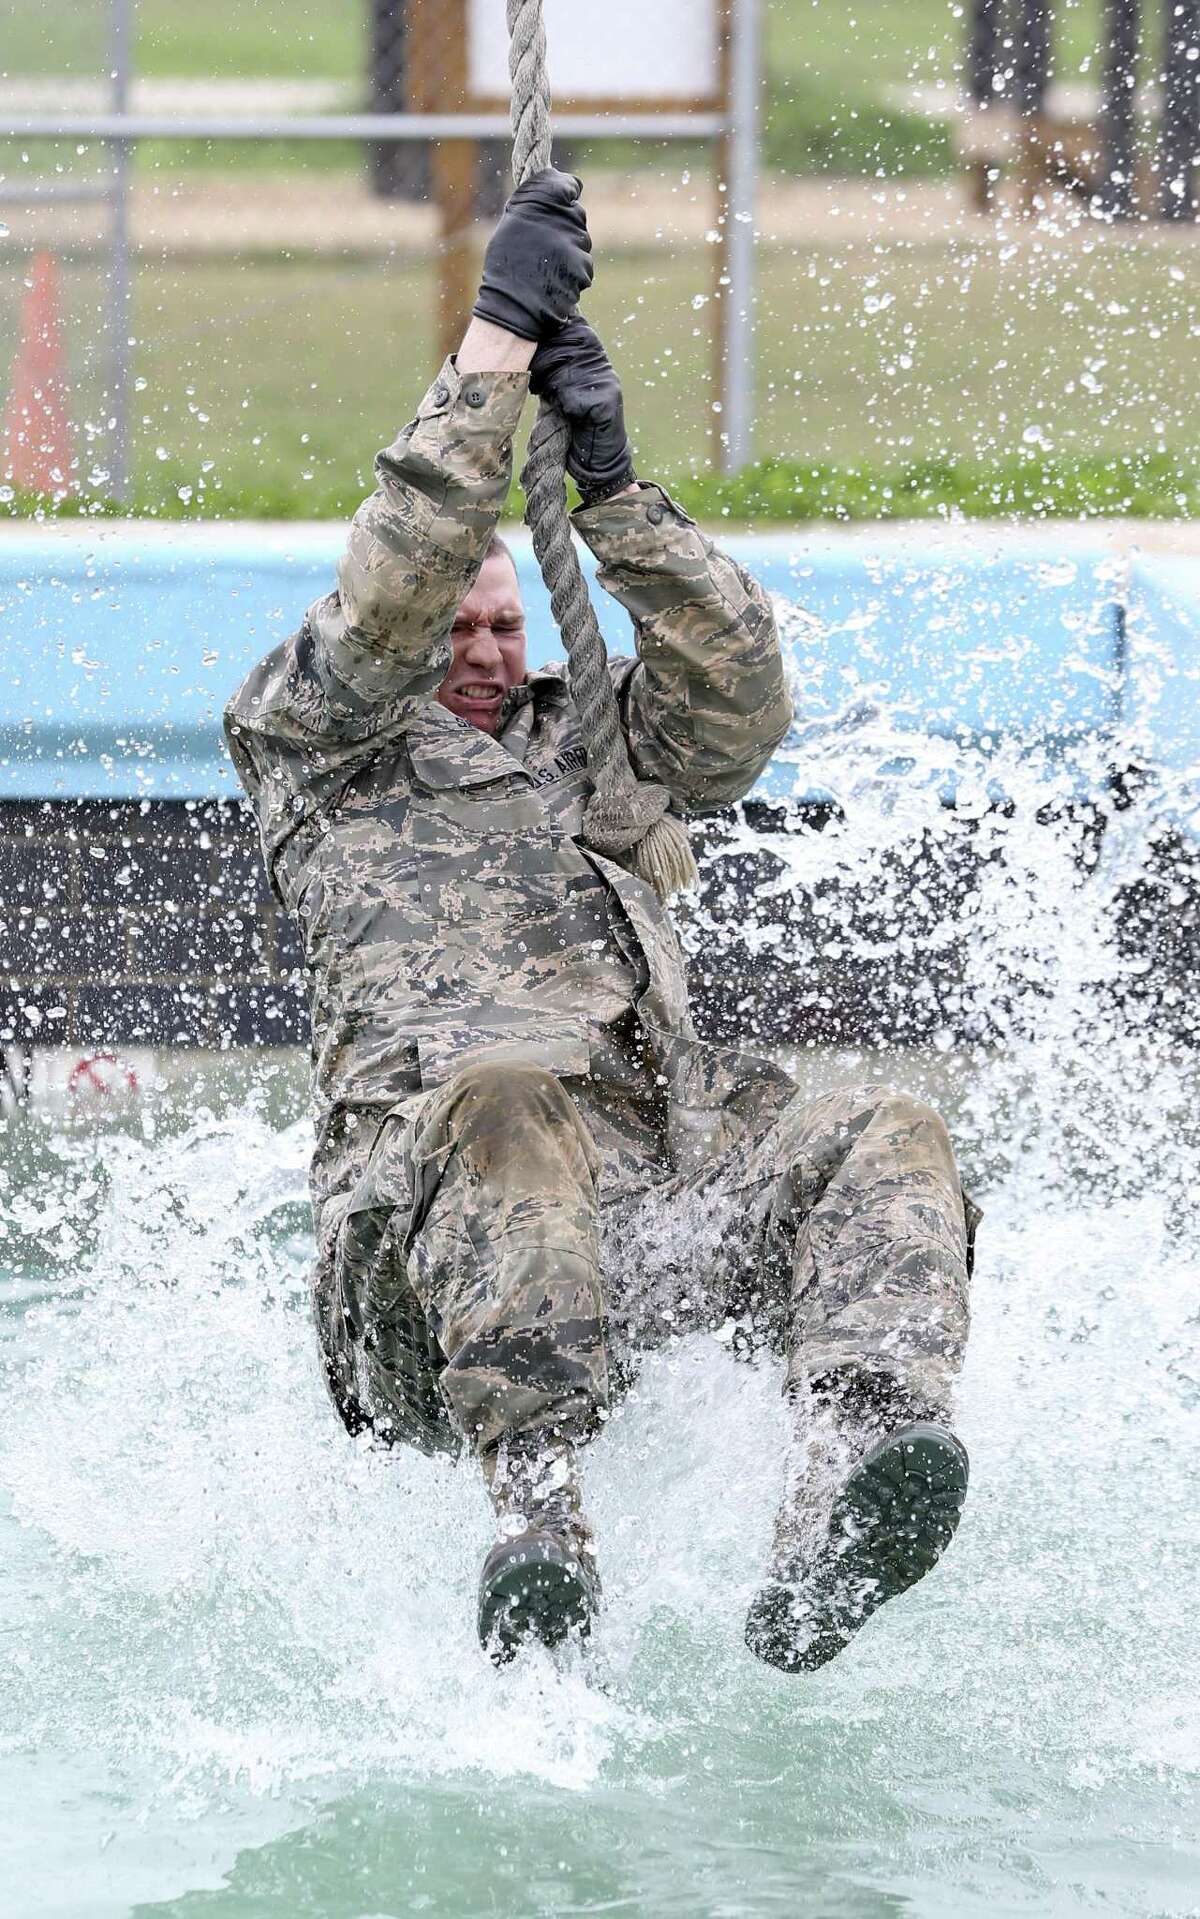 An Air Force recruit skims across the water in an exercise in the CLAW obstacle course, part of the BEAST program at Joint Base San Antonio-Lackland, on Feb. 6, 2019.